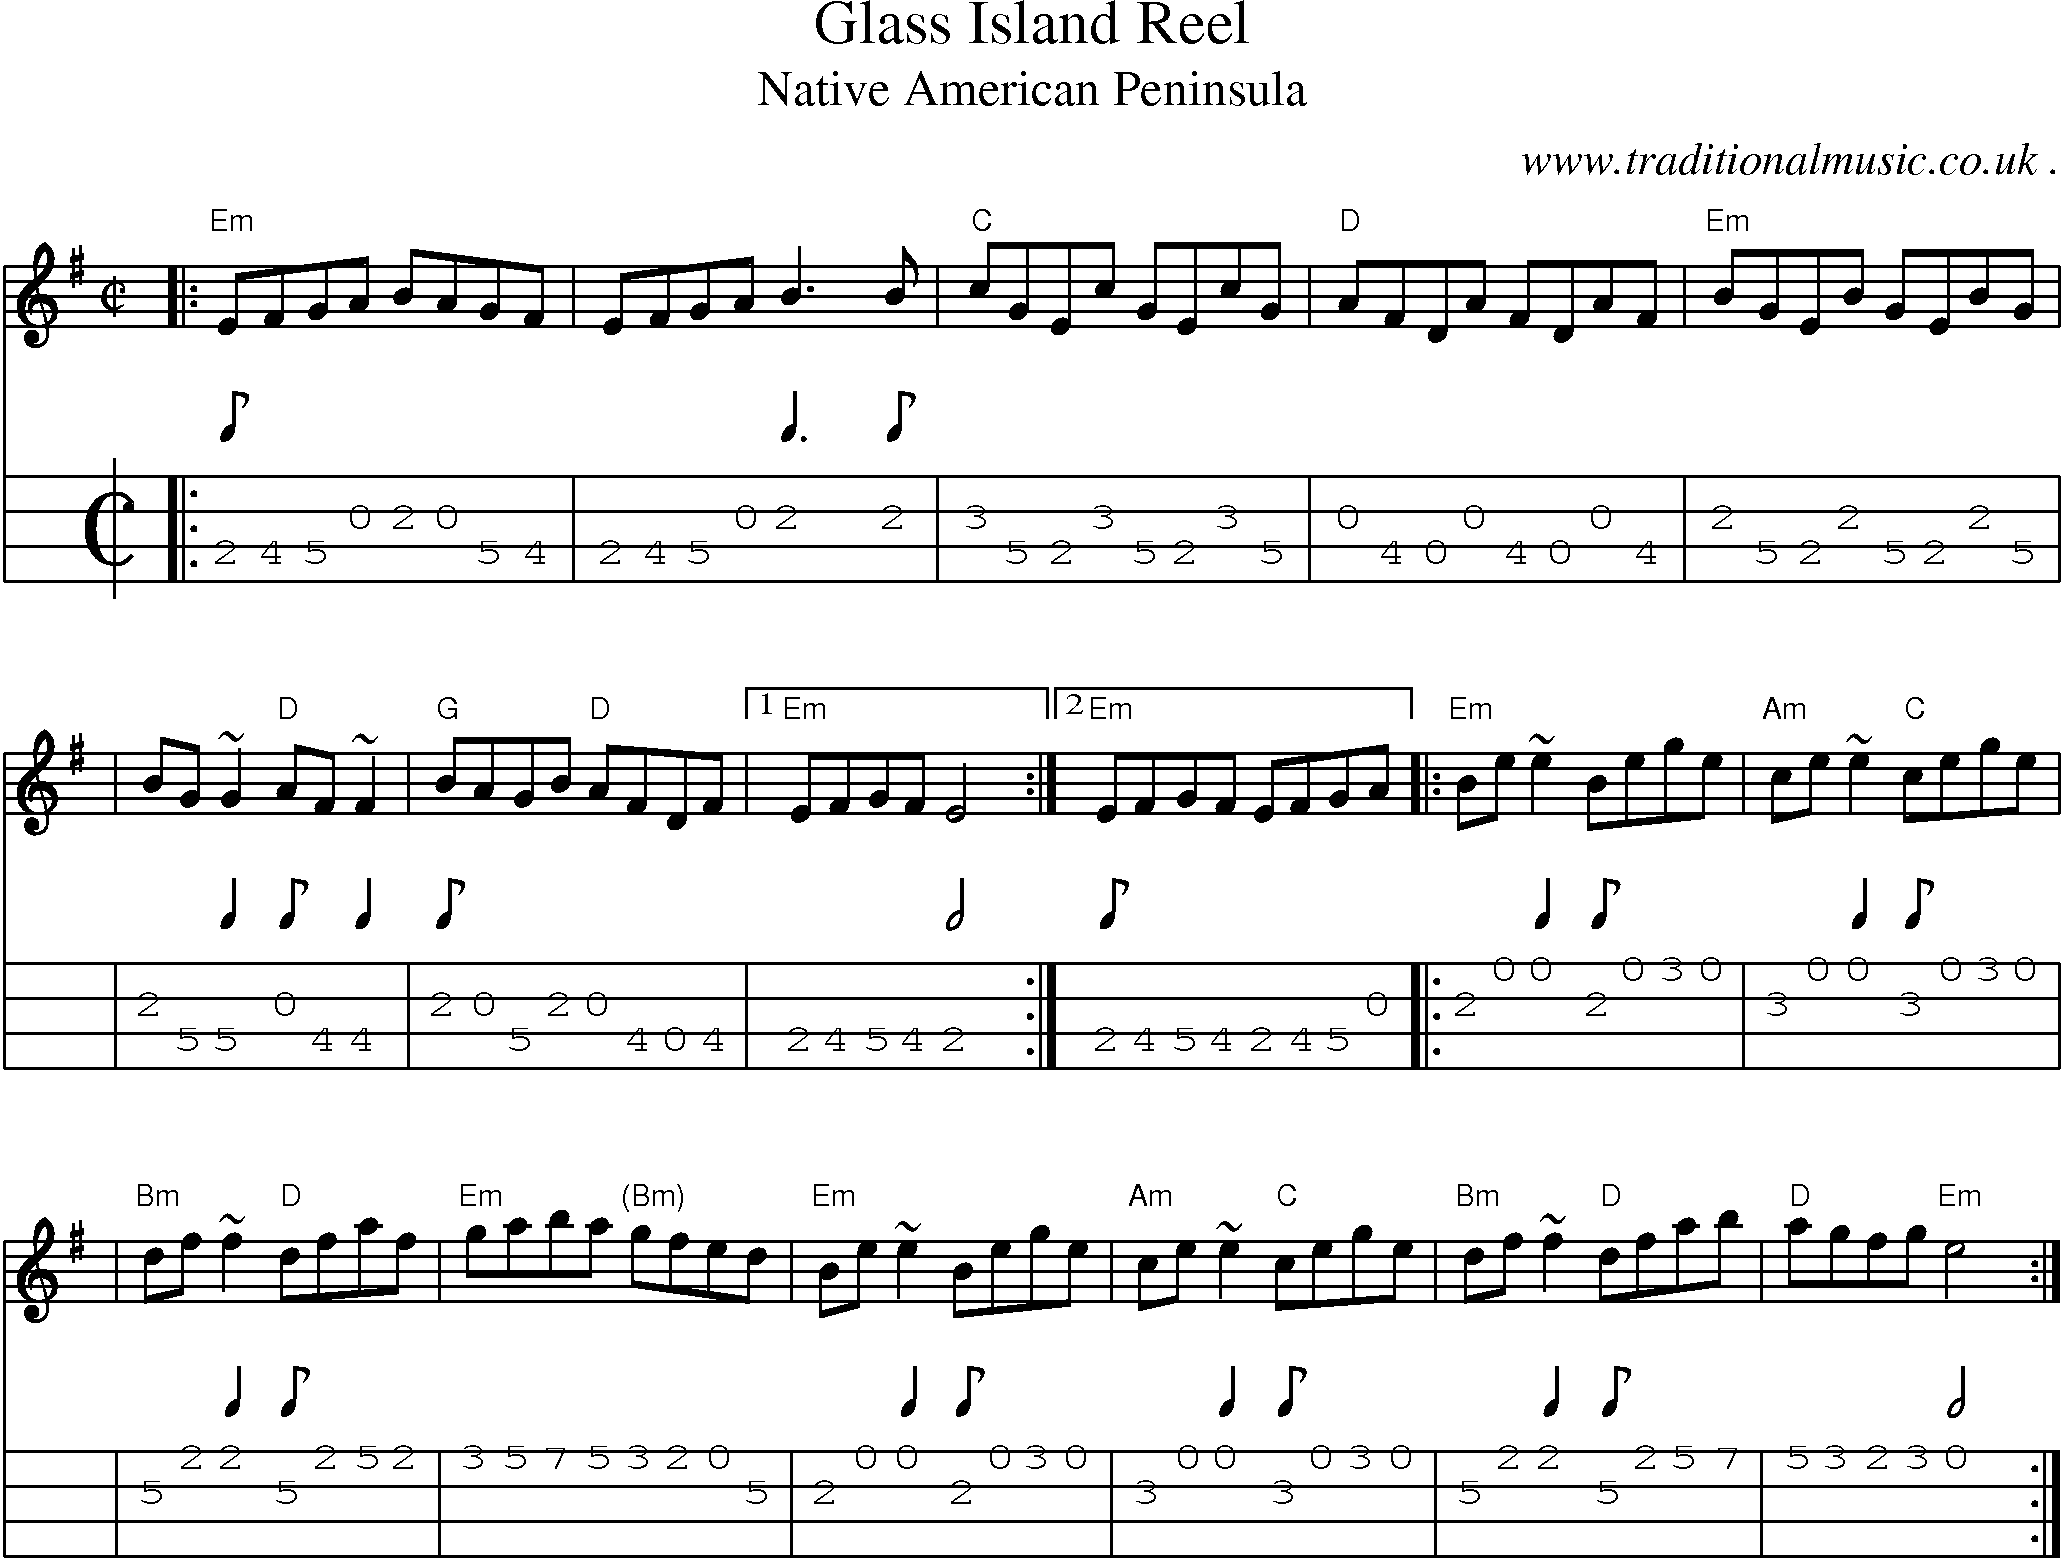 Sheet-music  score, Chords and Mandolin Tabs for Glass Island Reel